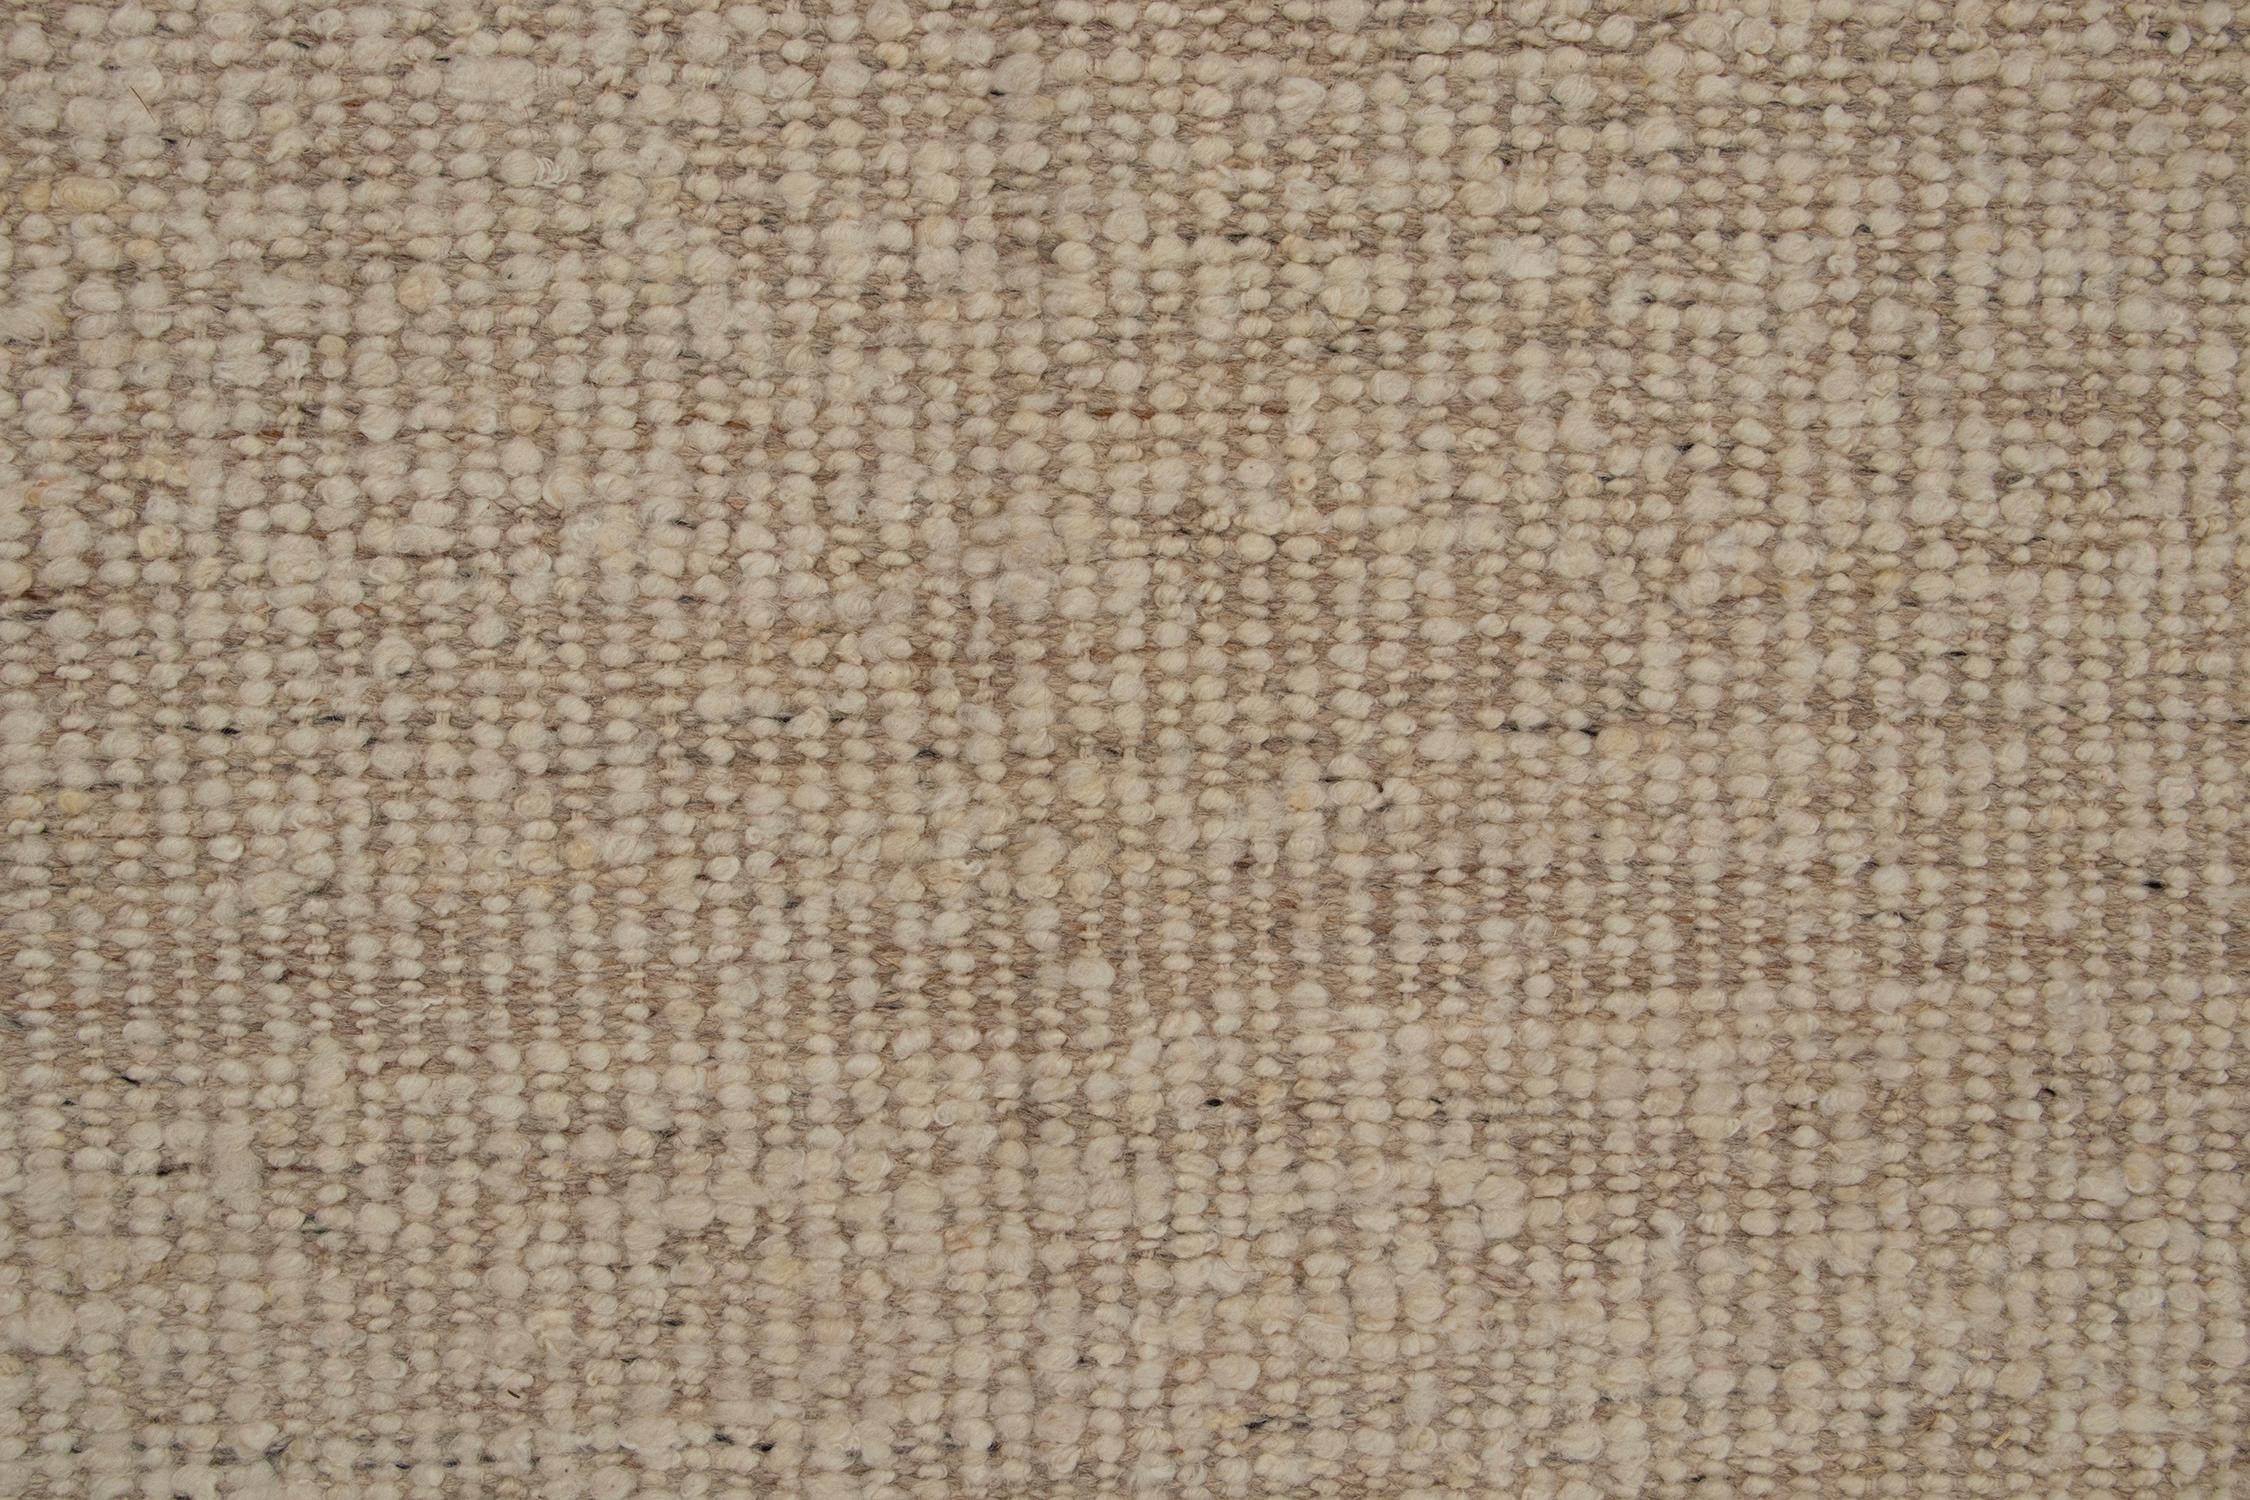 Rug & Kilim’s Contemporary Flat Weave in Solid Beige and White Boucle In New Condition For Sale In Long Island City, NY